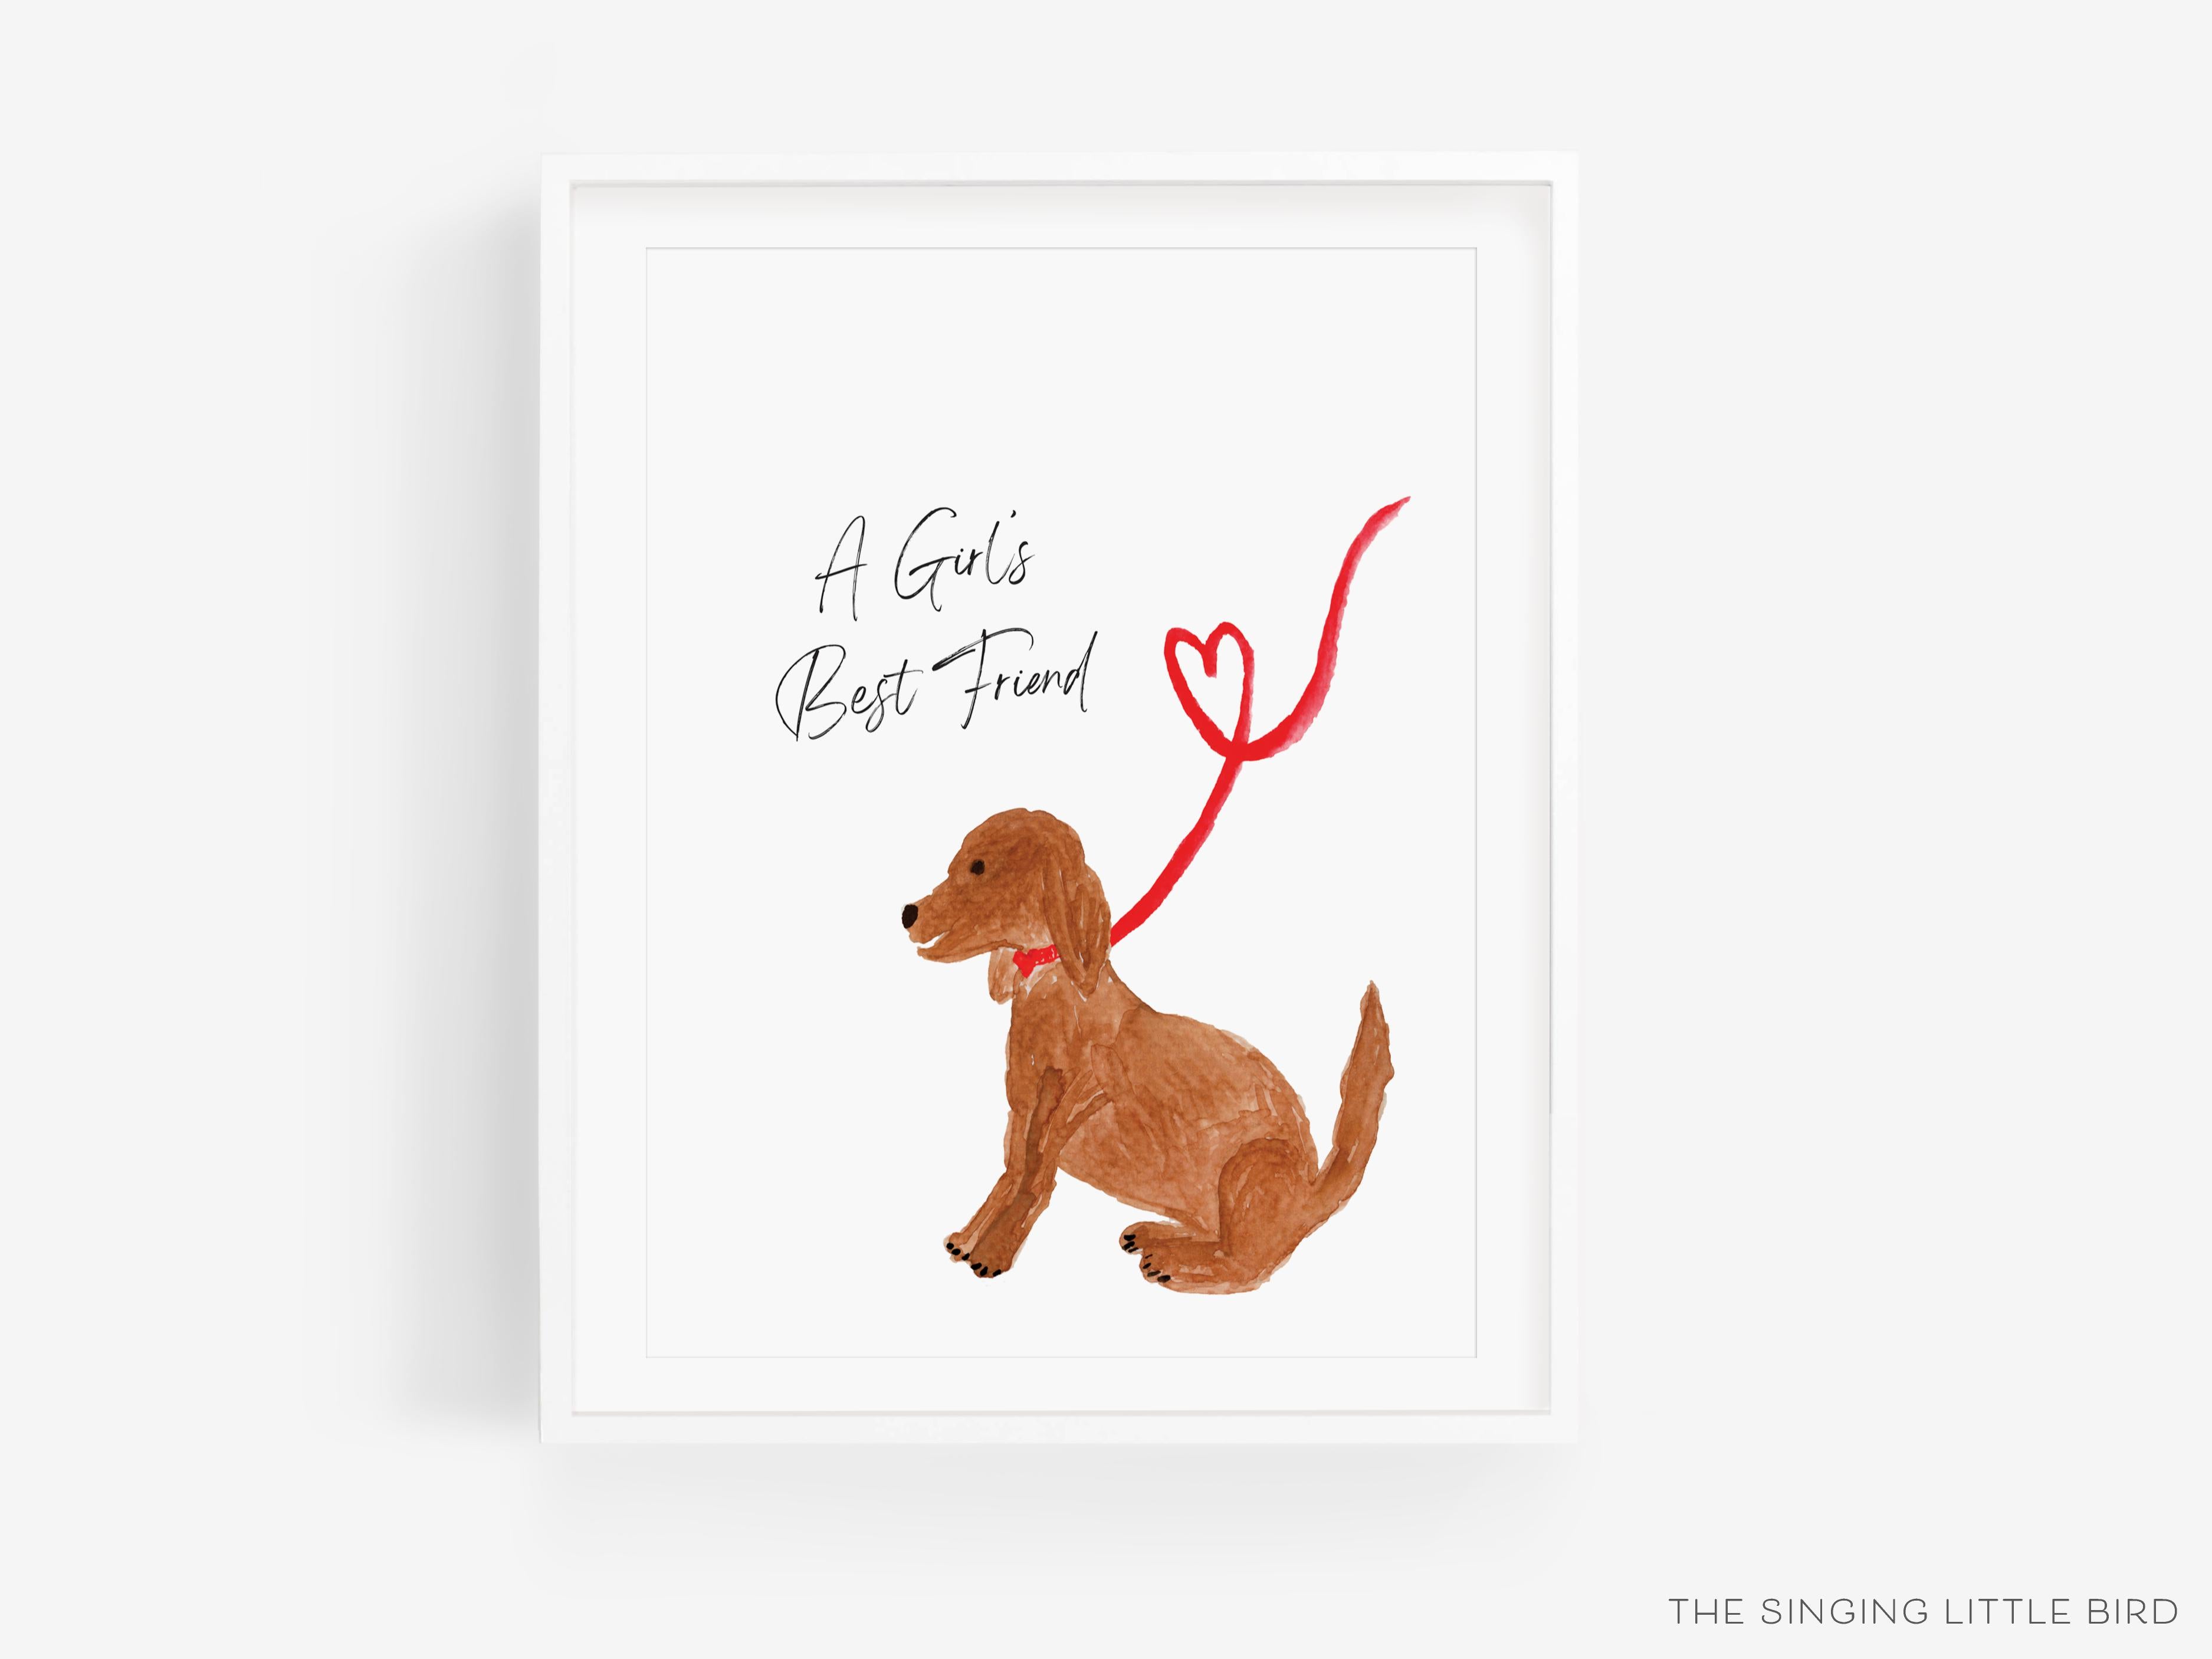 A Girl's Best Friend Dog Art Print-This watercolor art print features our hand-painted dog, printed in the USA on 120lb high quality art paper. This makes a great gift or wall decor for the animal lover in your life.-The Singing Little Bird